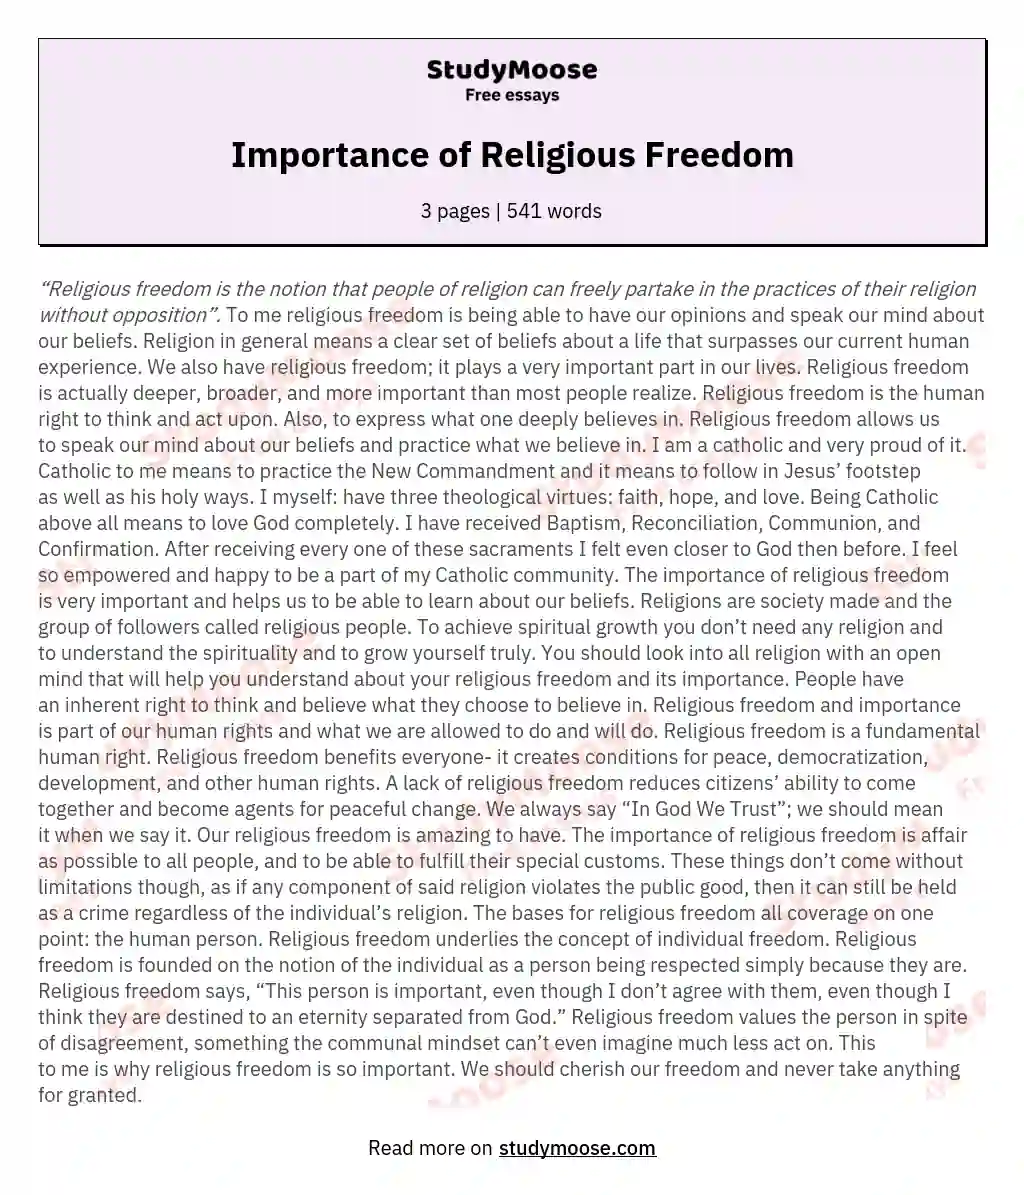 Importance of Religious Freedom essay